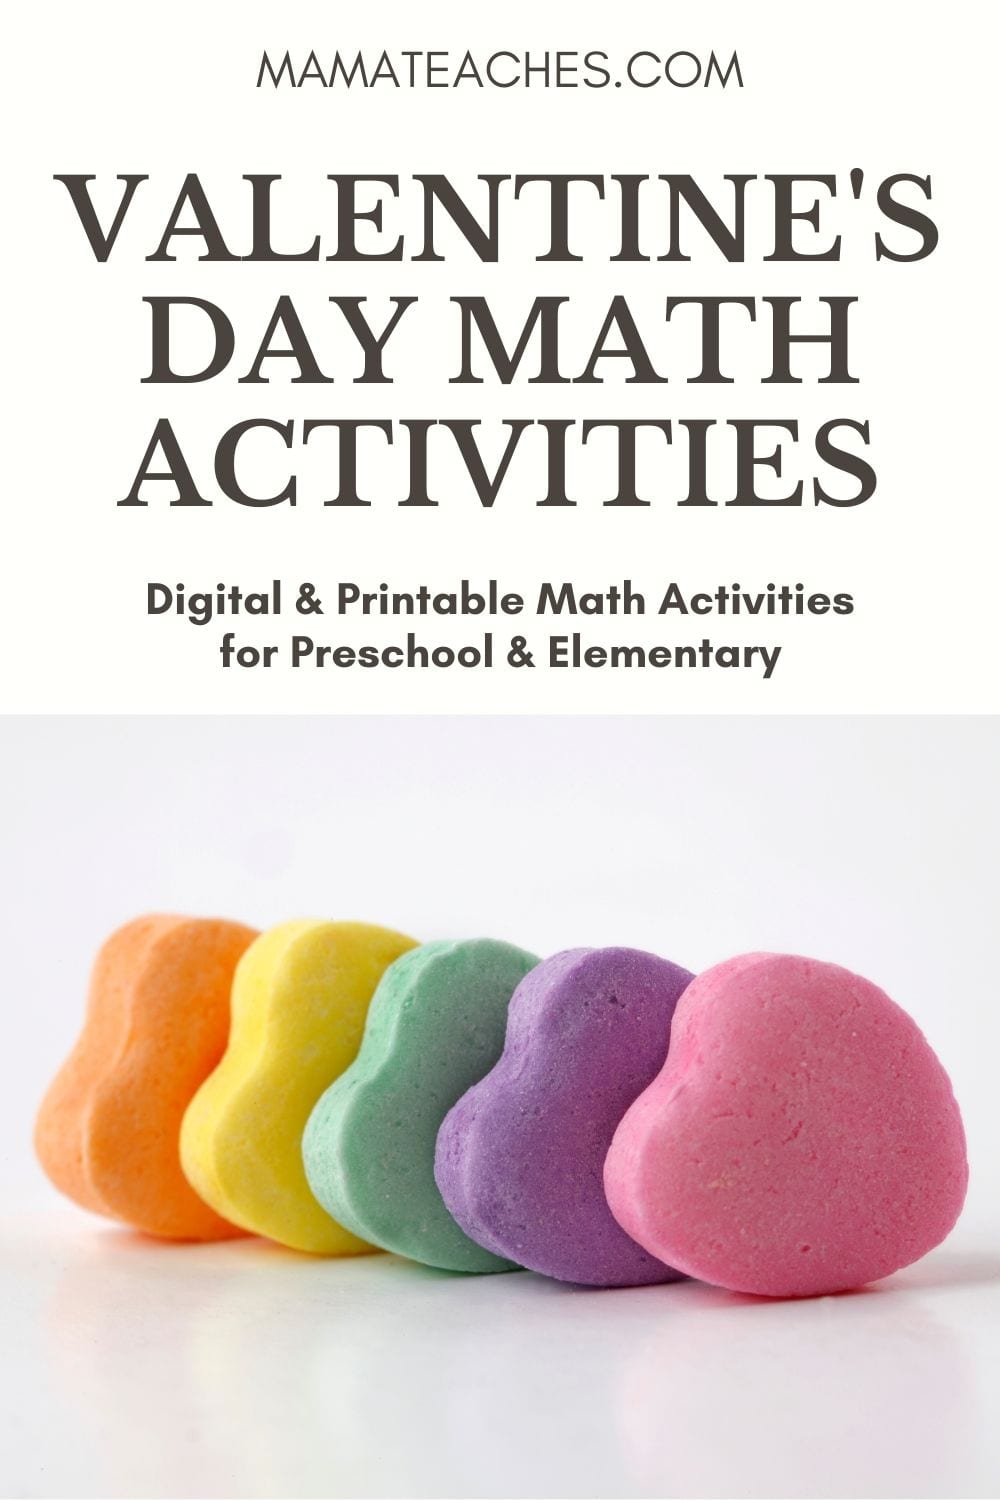 Valentine's Day Math Activities for Kids